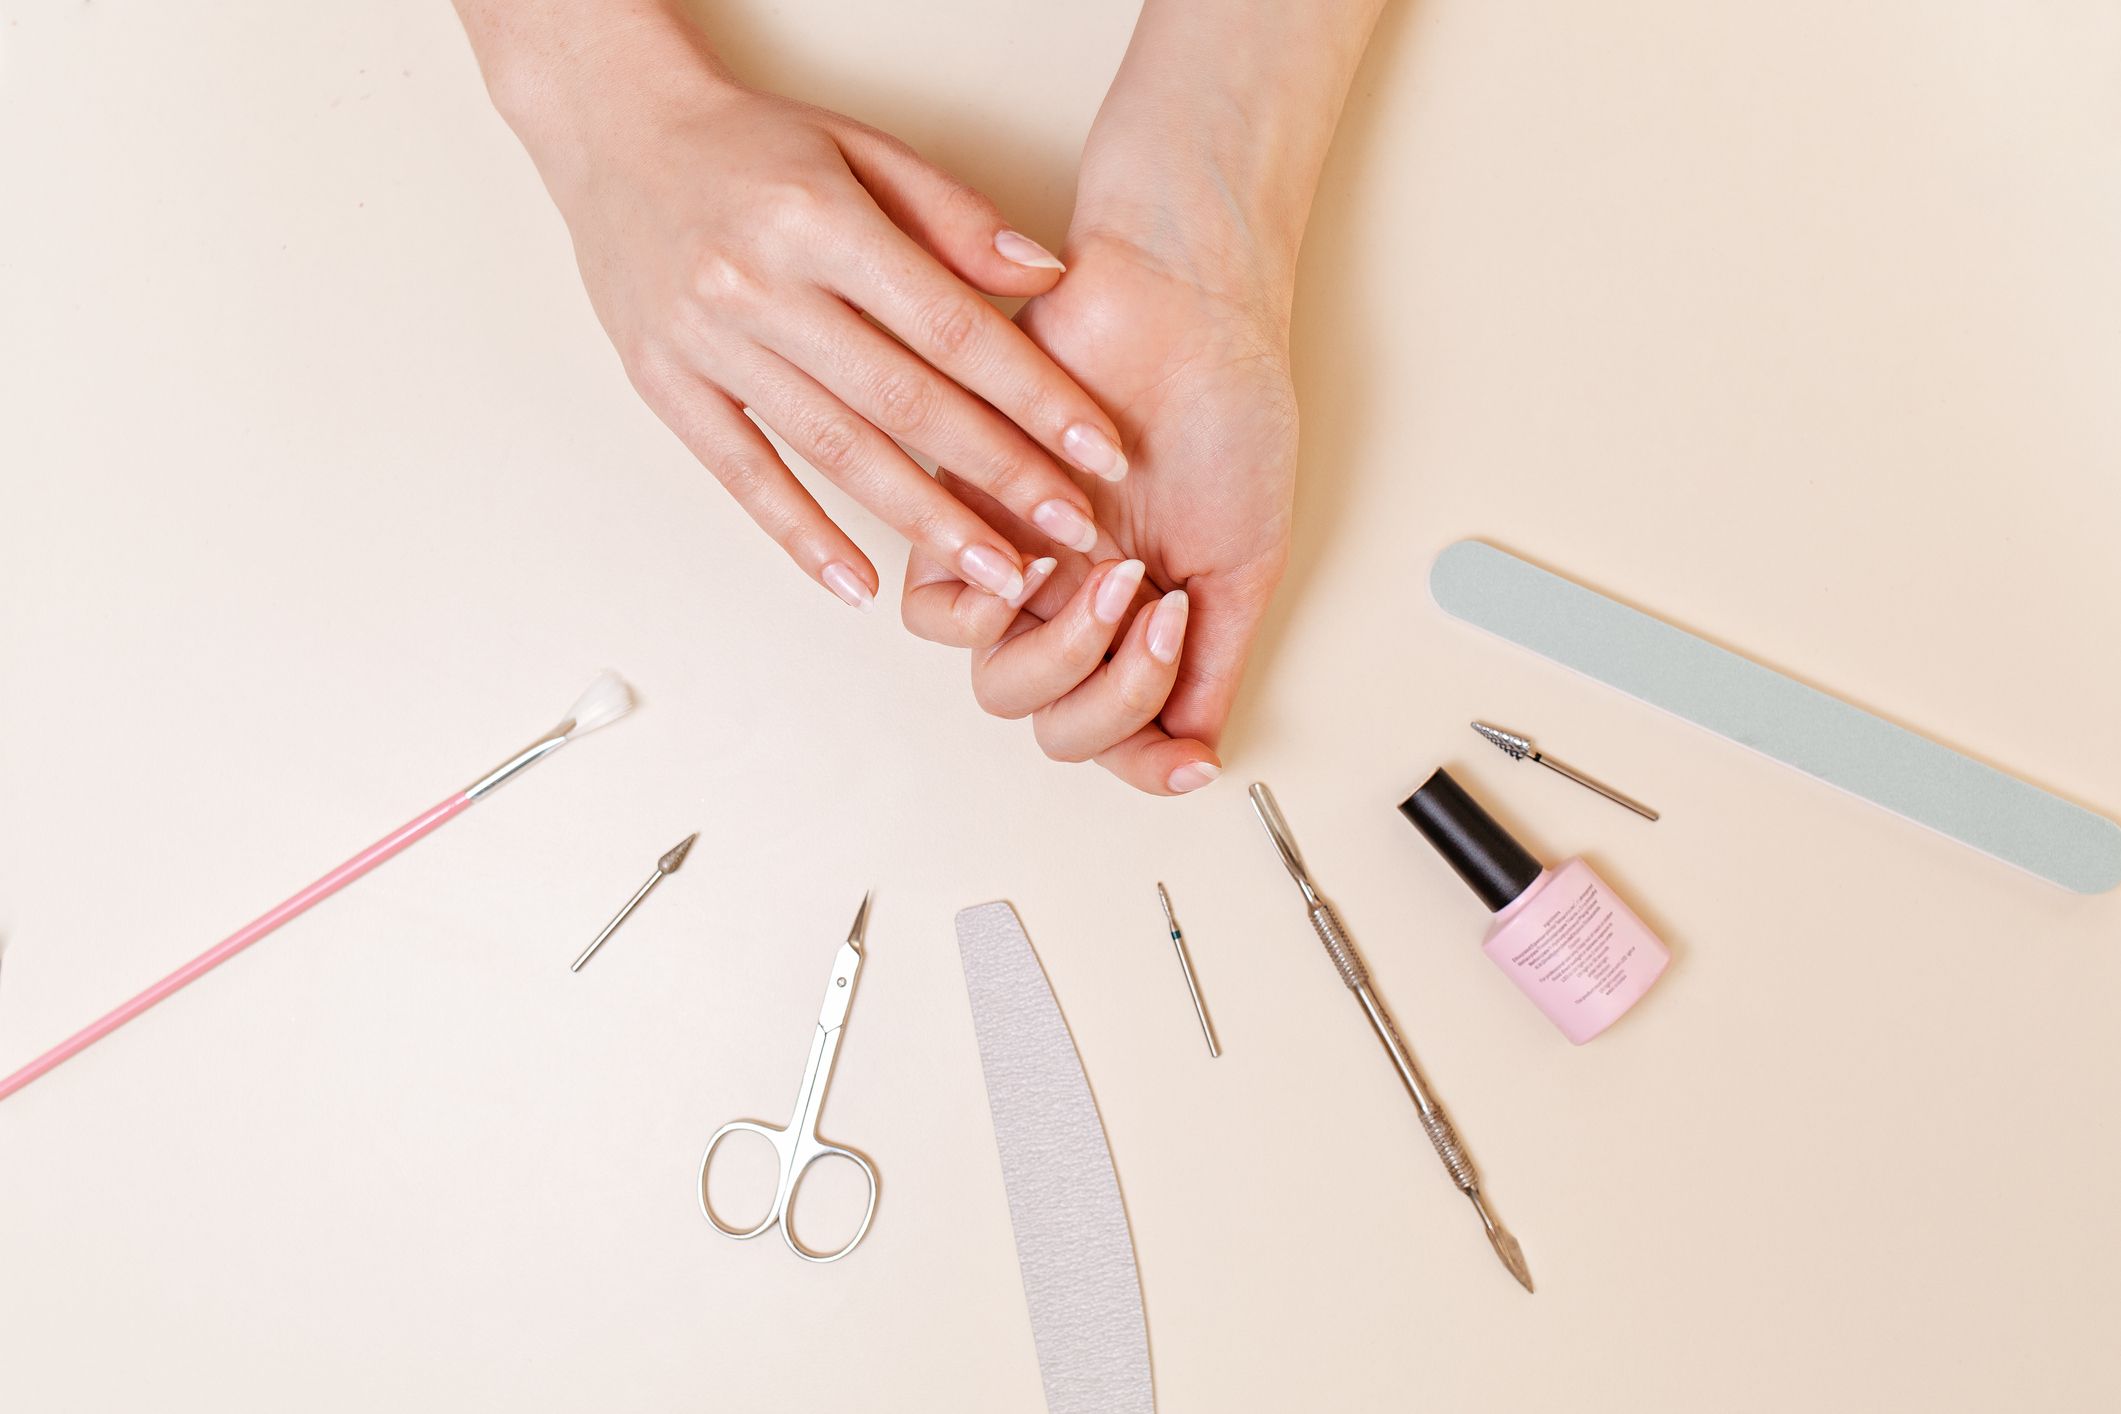 Safely Remove Acrylic Nails at Home: Top Methods for a Damage-Free